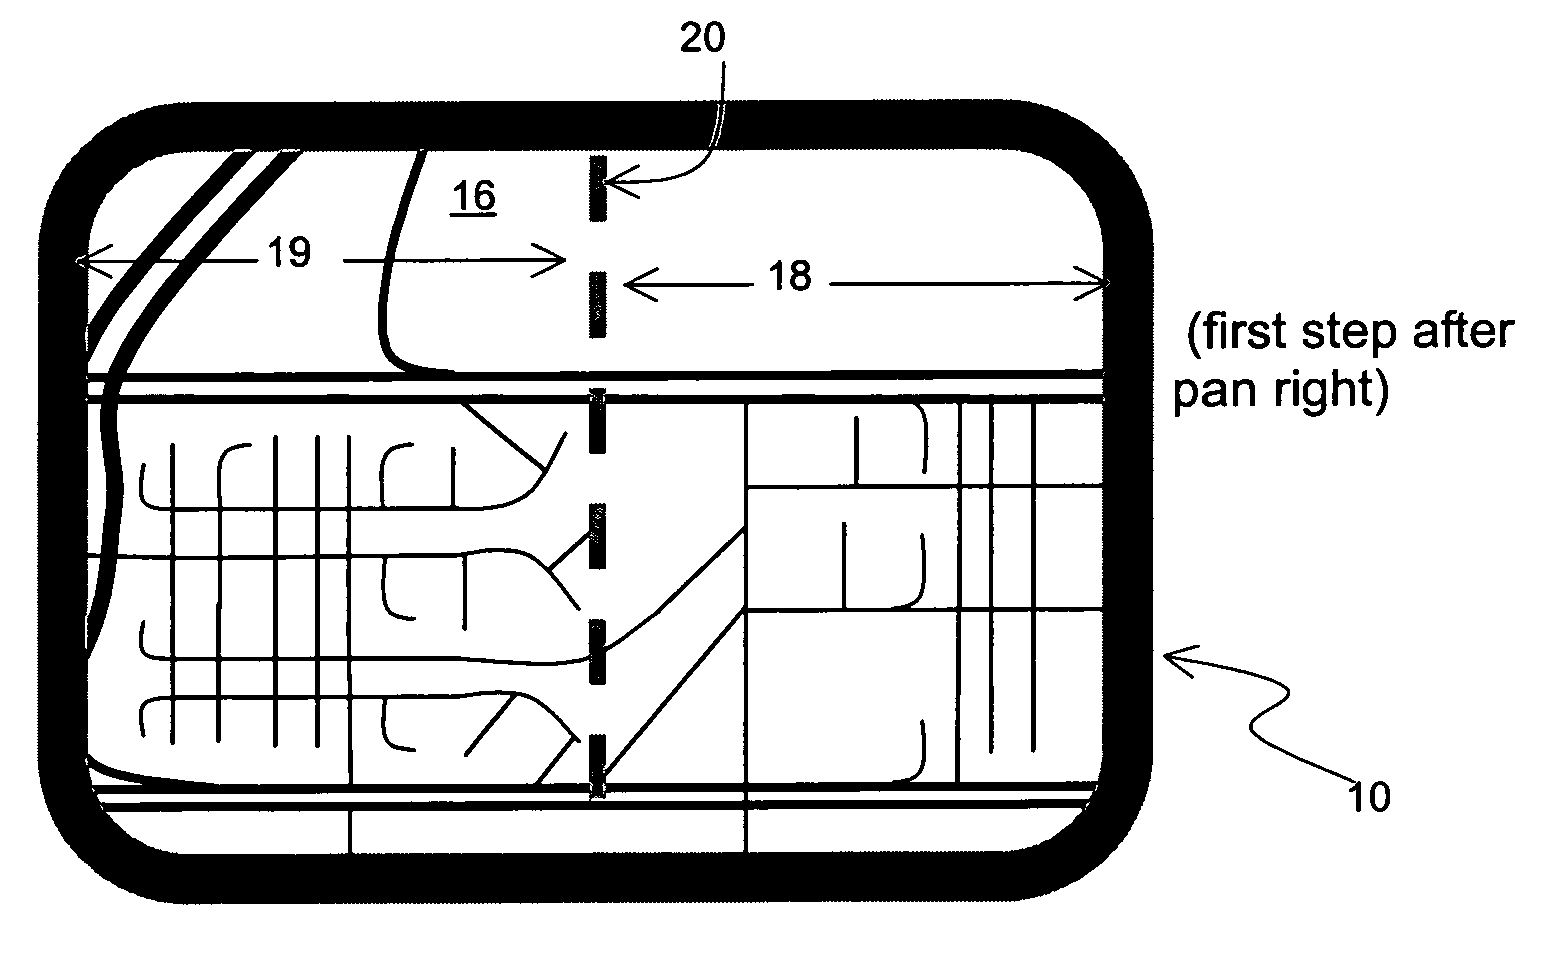 Method of providing visual continuity when panning and zooming with a map display